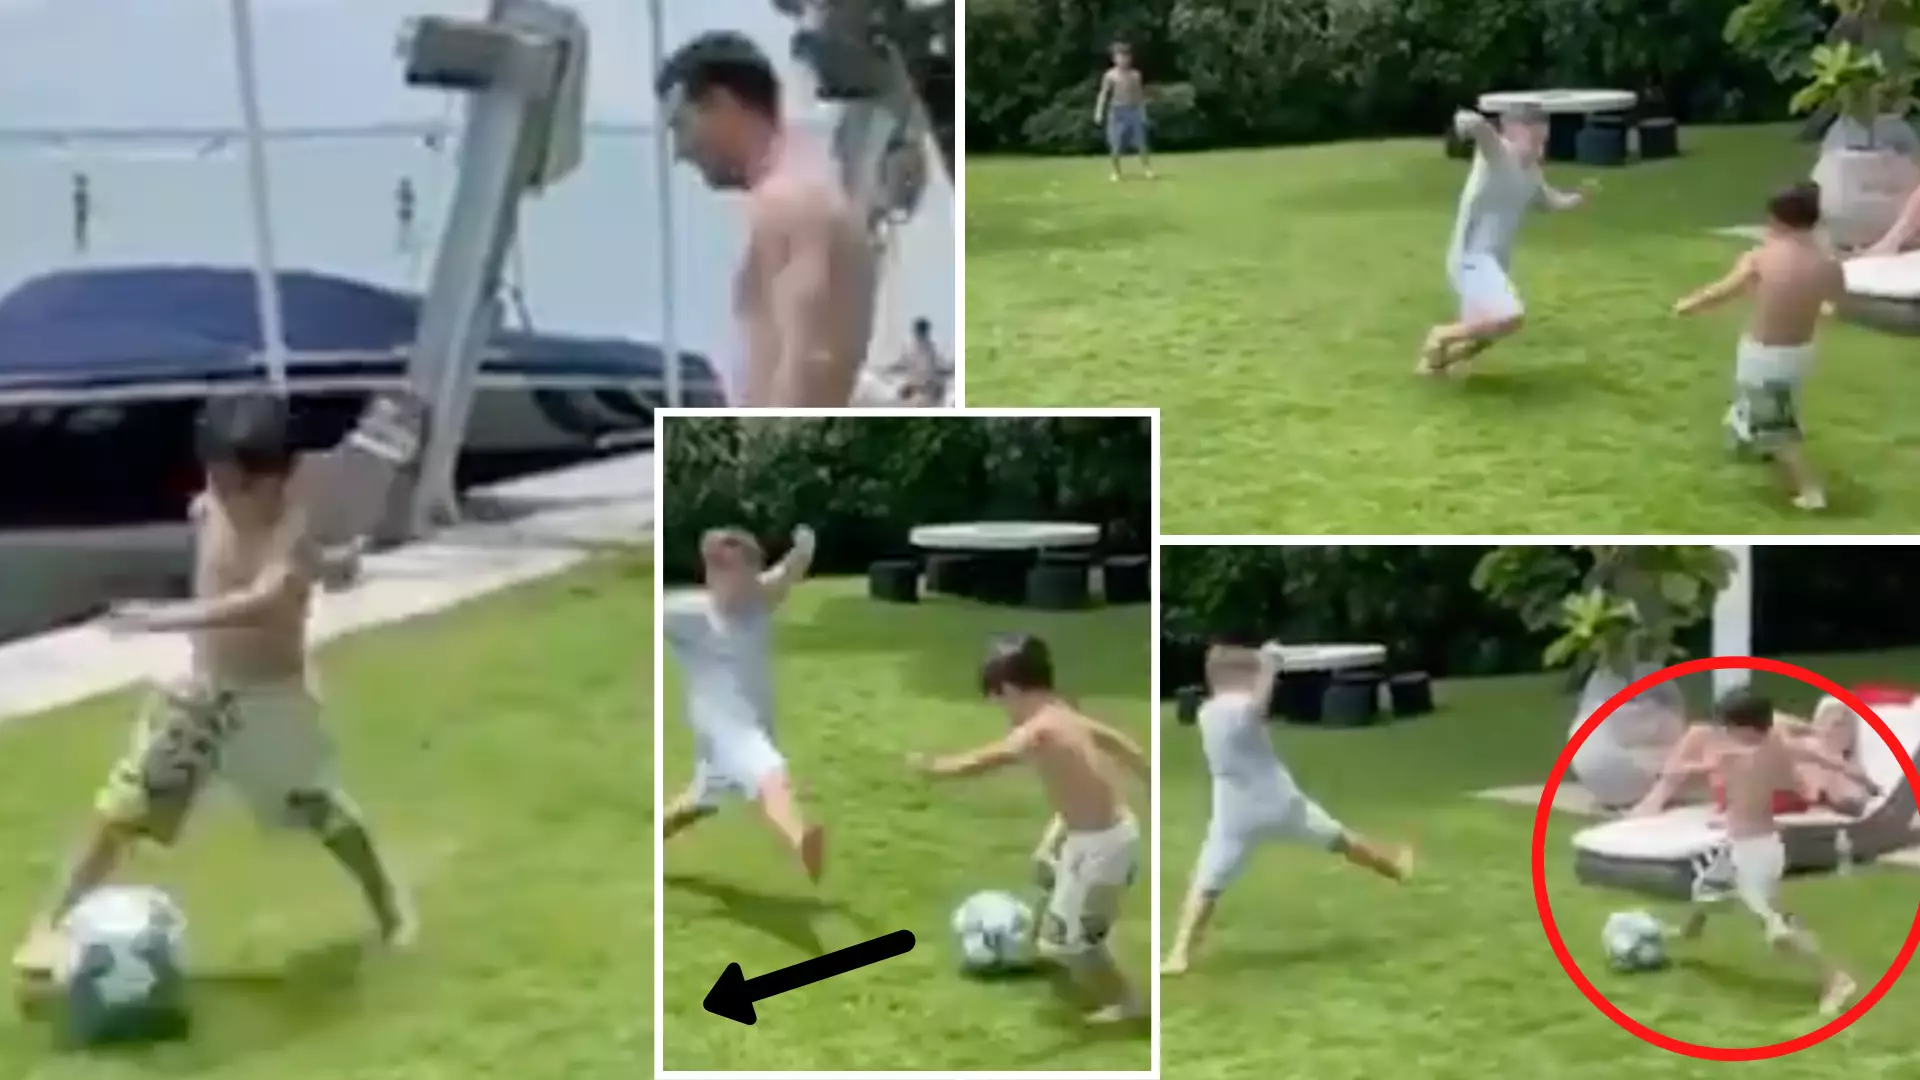 Mateo Messi Shows Shades Of Lionel Messi With 'Baller' Skills In Piggy In The Middle Game